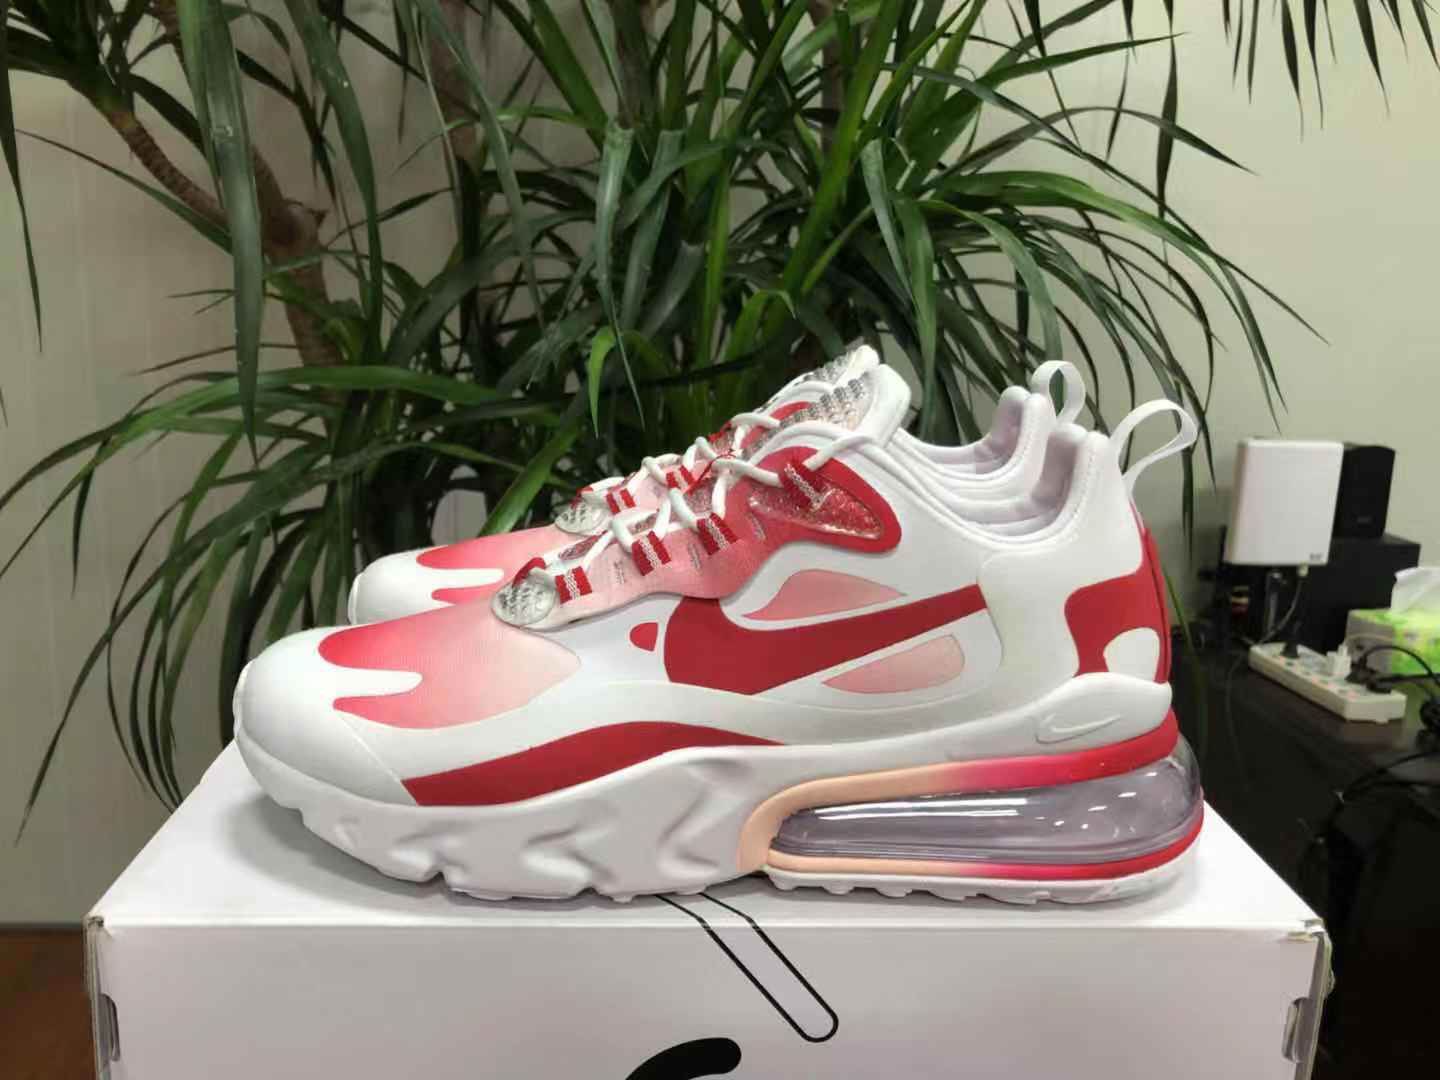 Women's Hot sale Running weapon Air Max Shoes 023